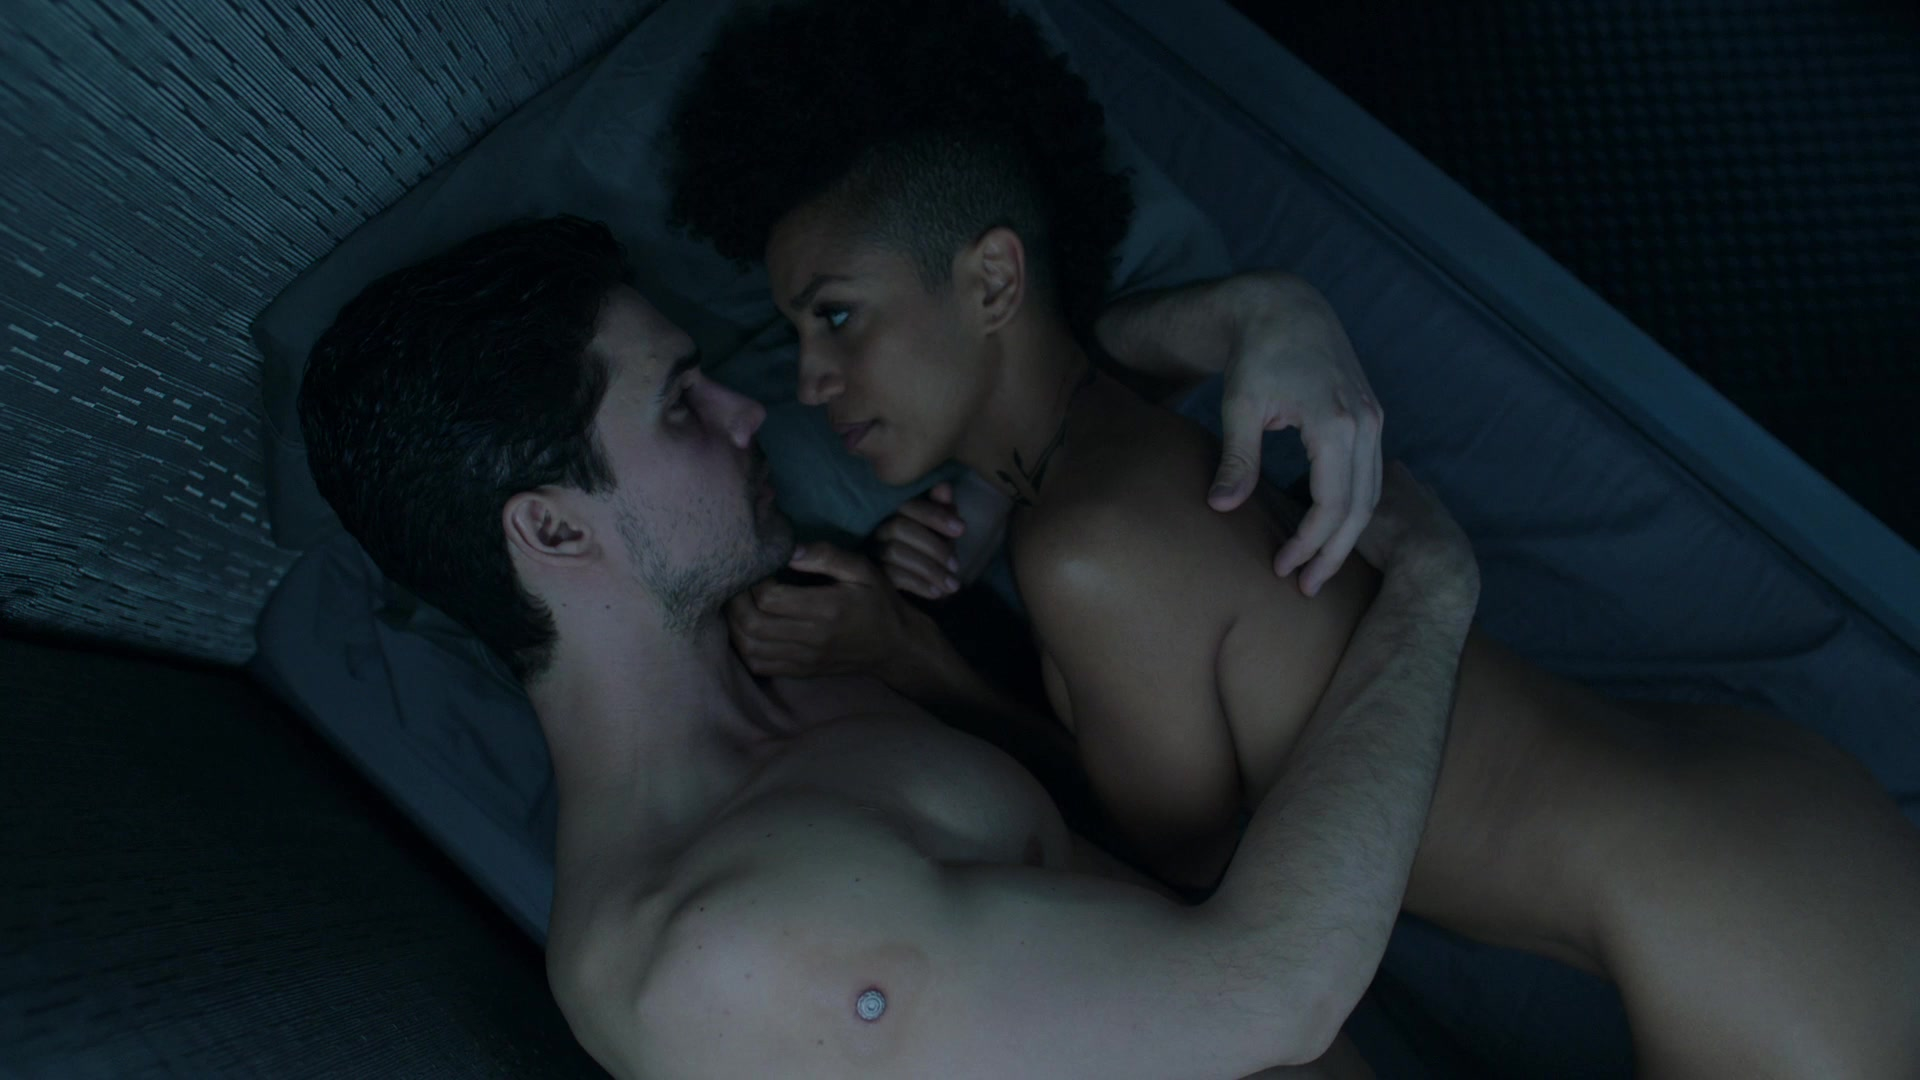 Nude video celebs » Dominique Tipper nude - The Expanse S03E06 (2018)